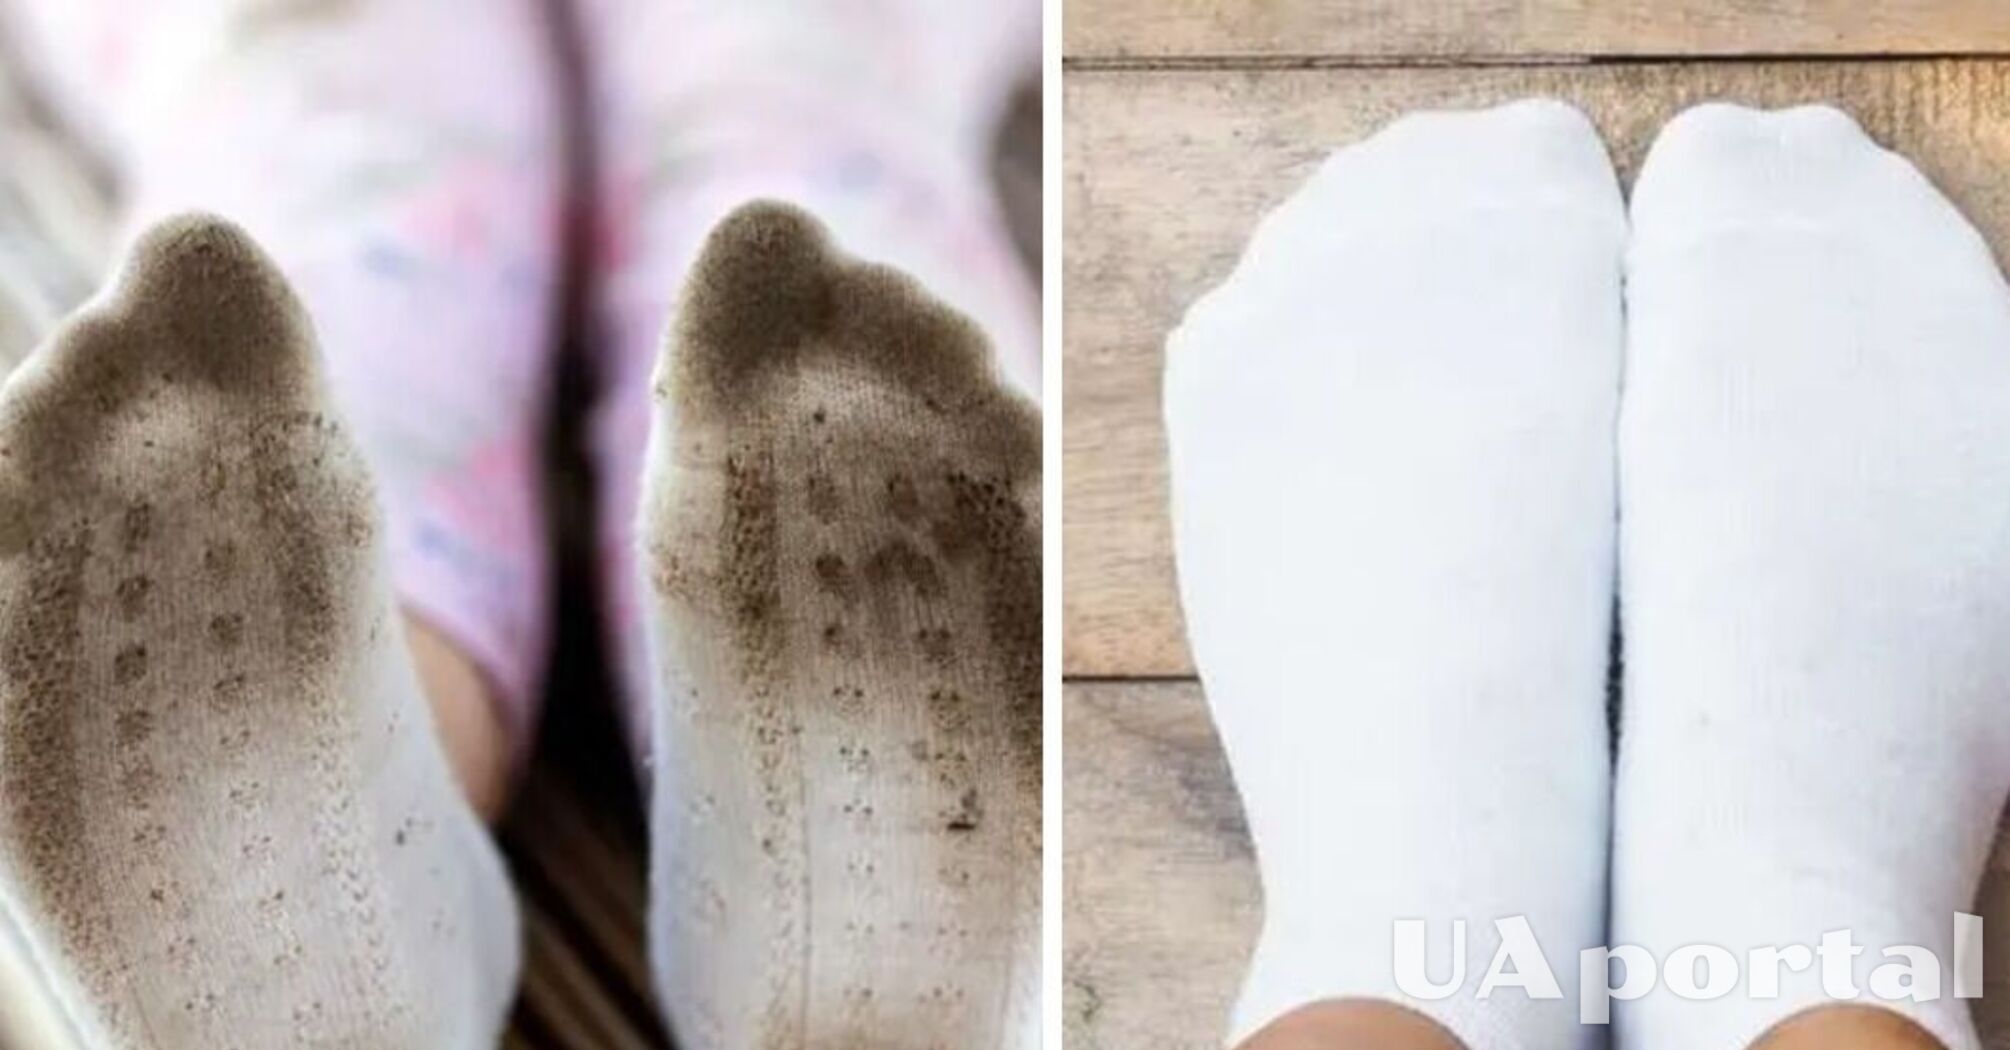 Three simple remedies that will save even the dirtiest white socks